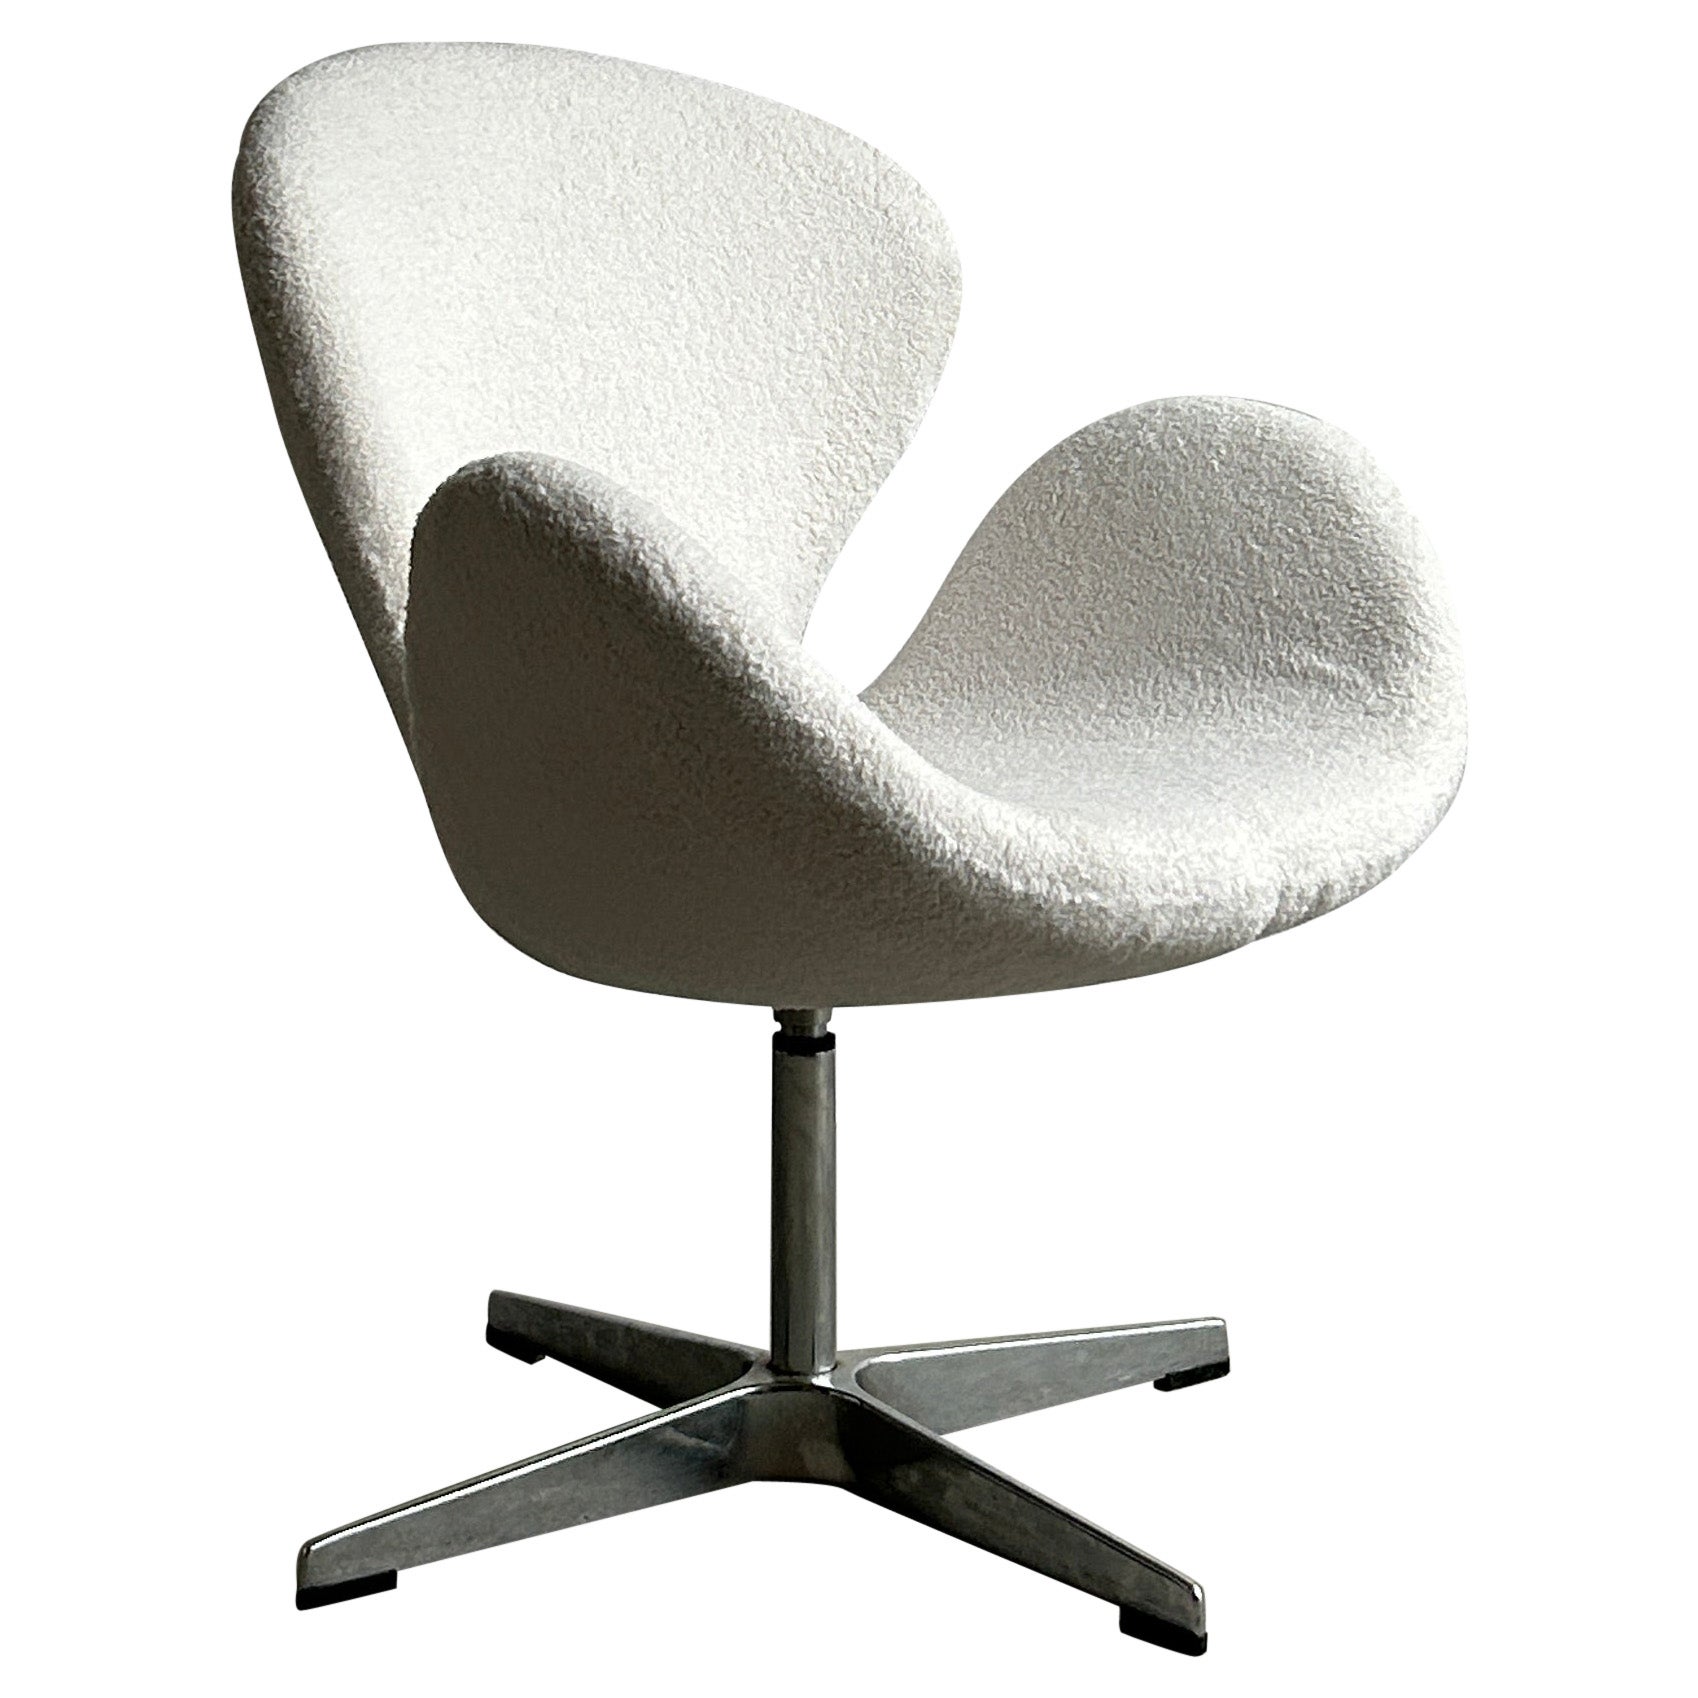 Vintage Swivel Armchair in Style of 'Swan' Chair by Arne Jacobsen, White Boucle For Sale